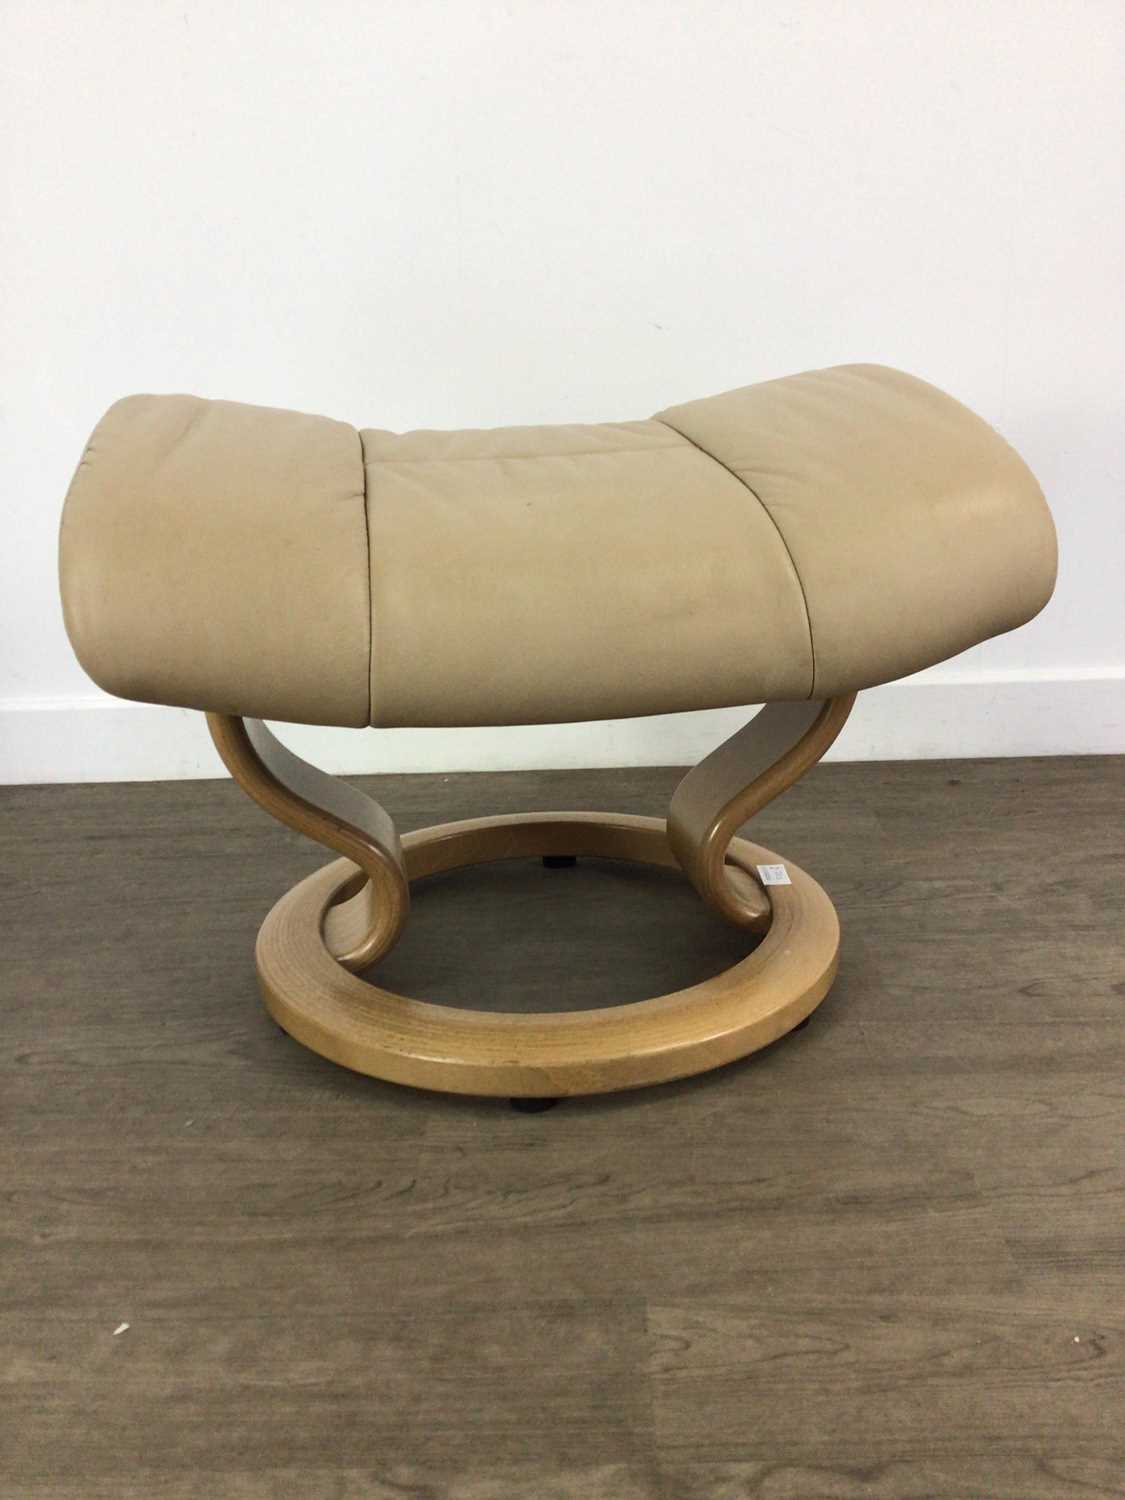 MODERN CREAM LEATHER ARMCHAIR WITH STOOL, - Image 2 of 2